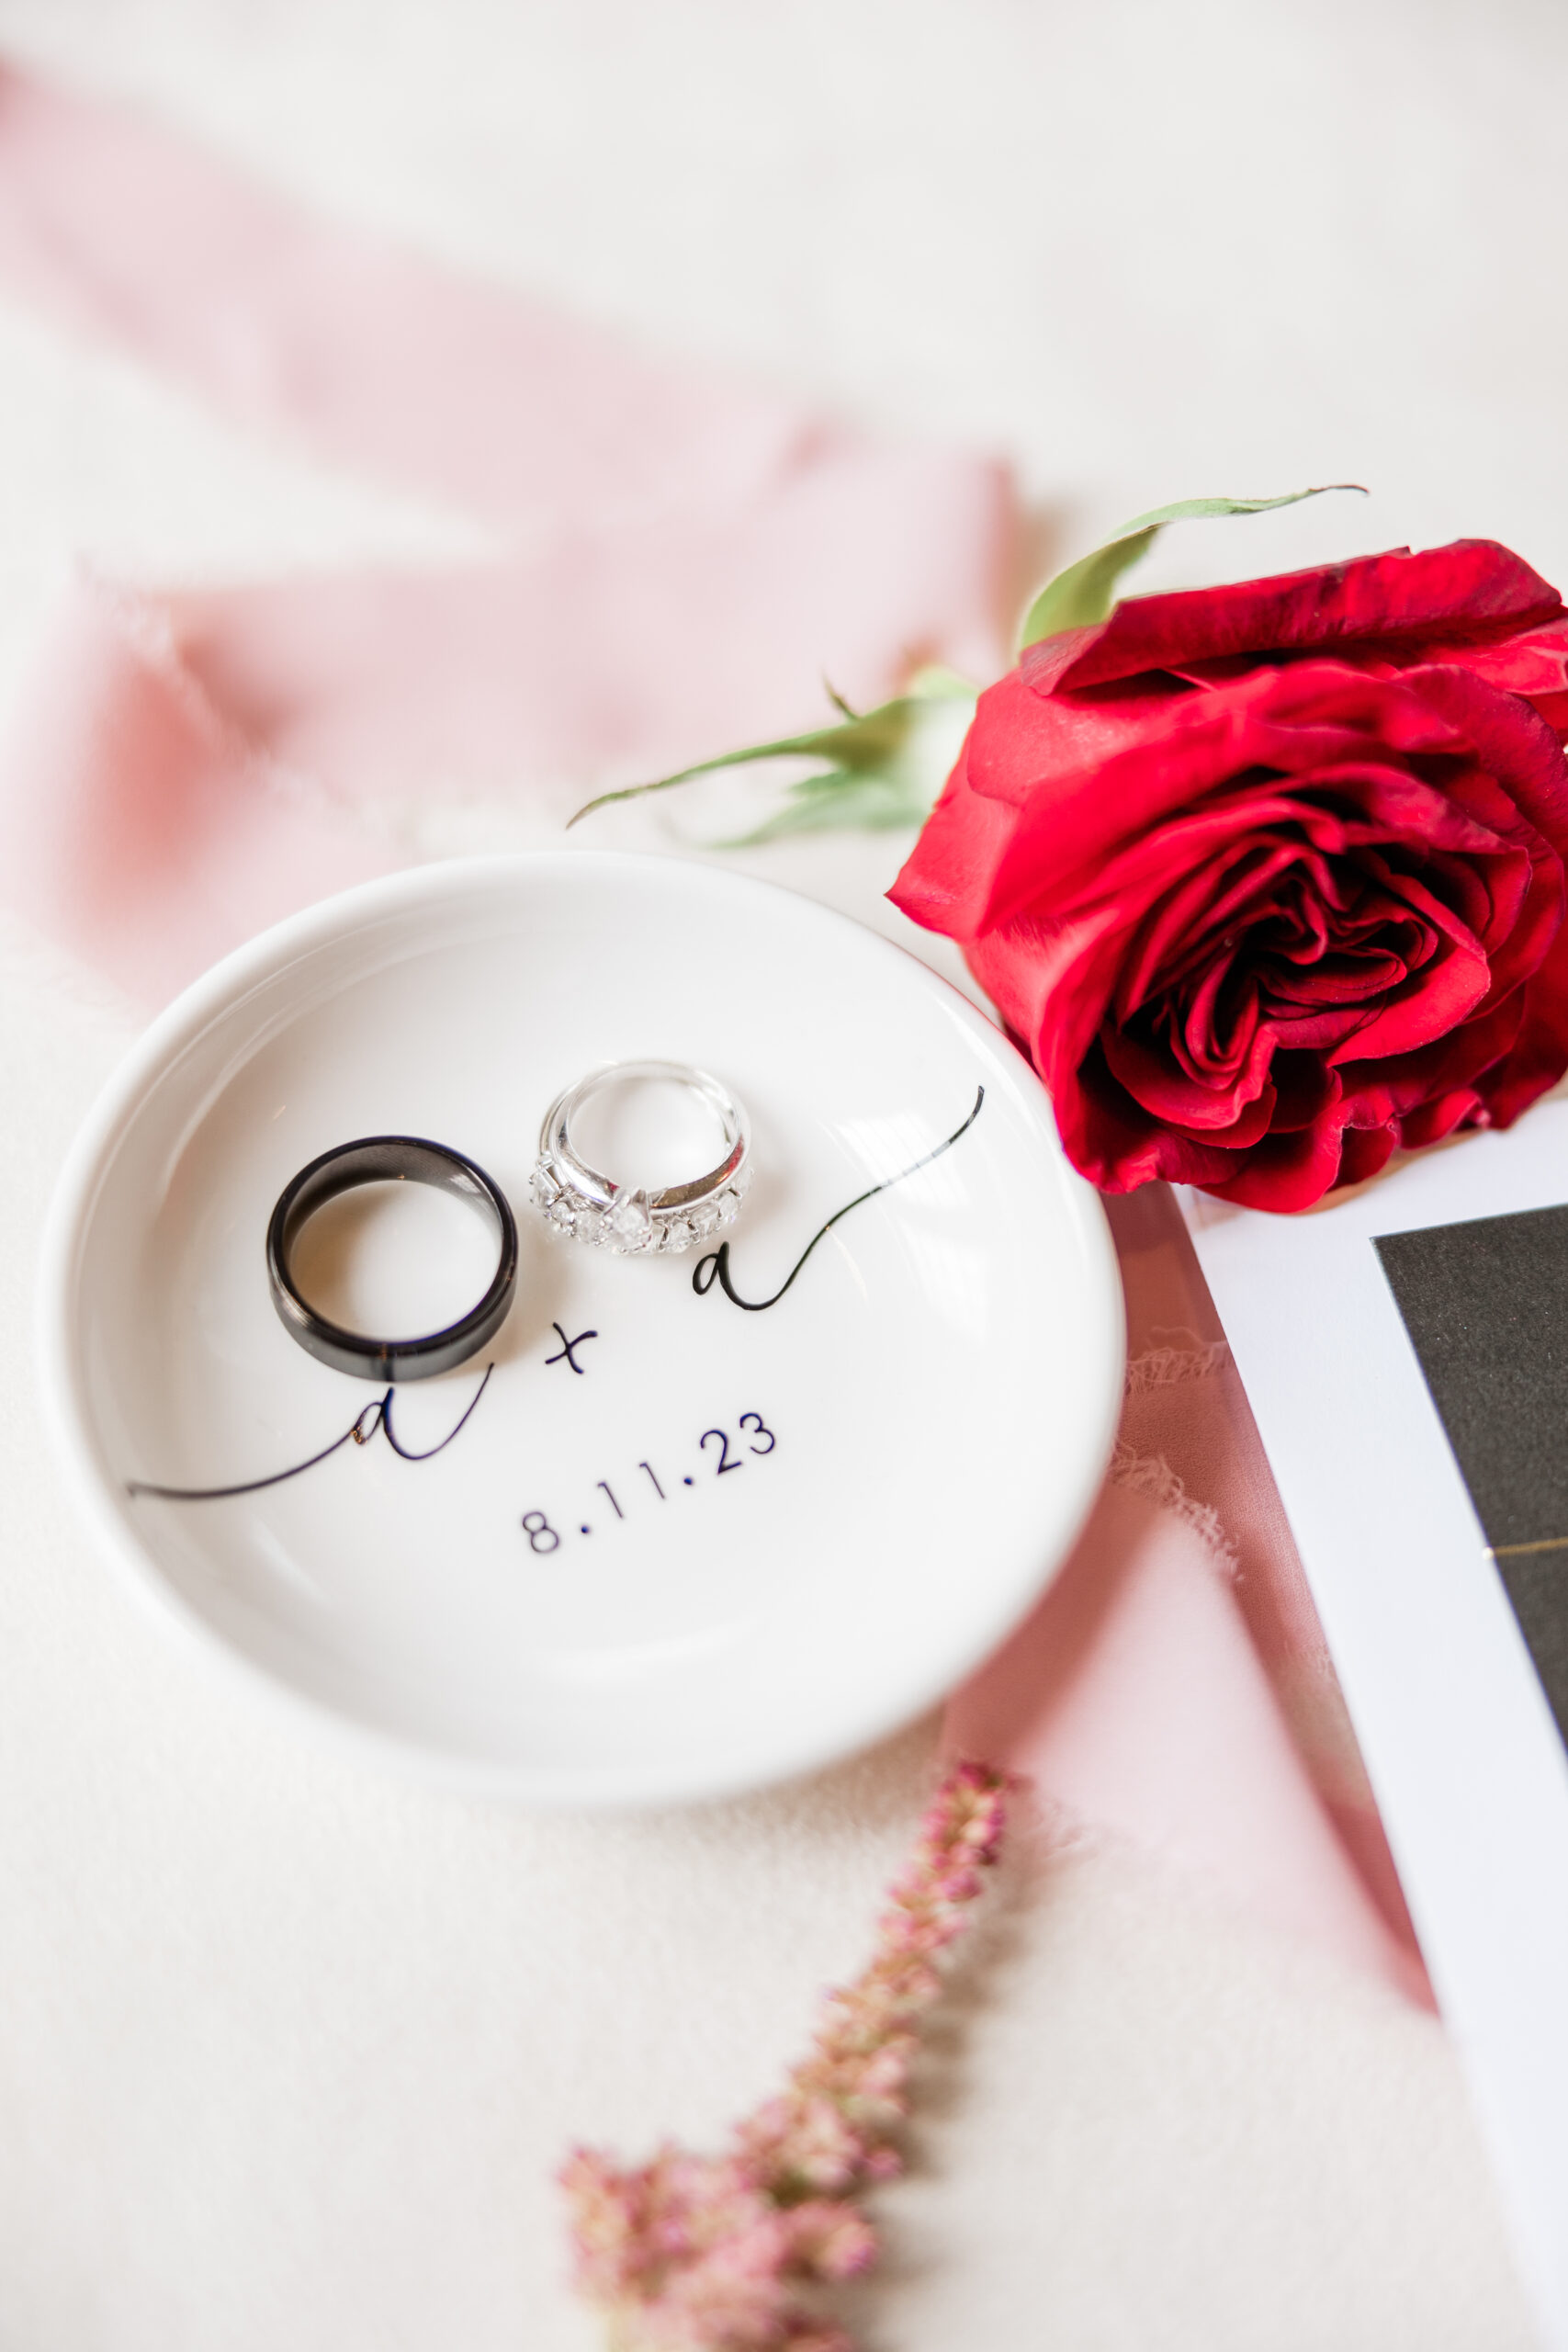 Wedding rings on a plate next to a red rose.